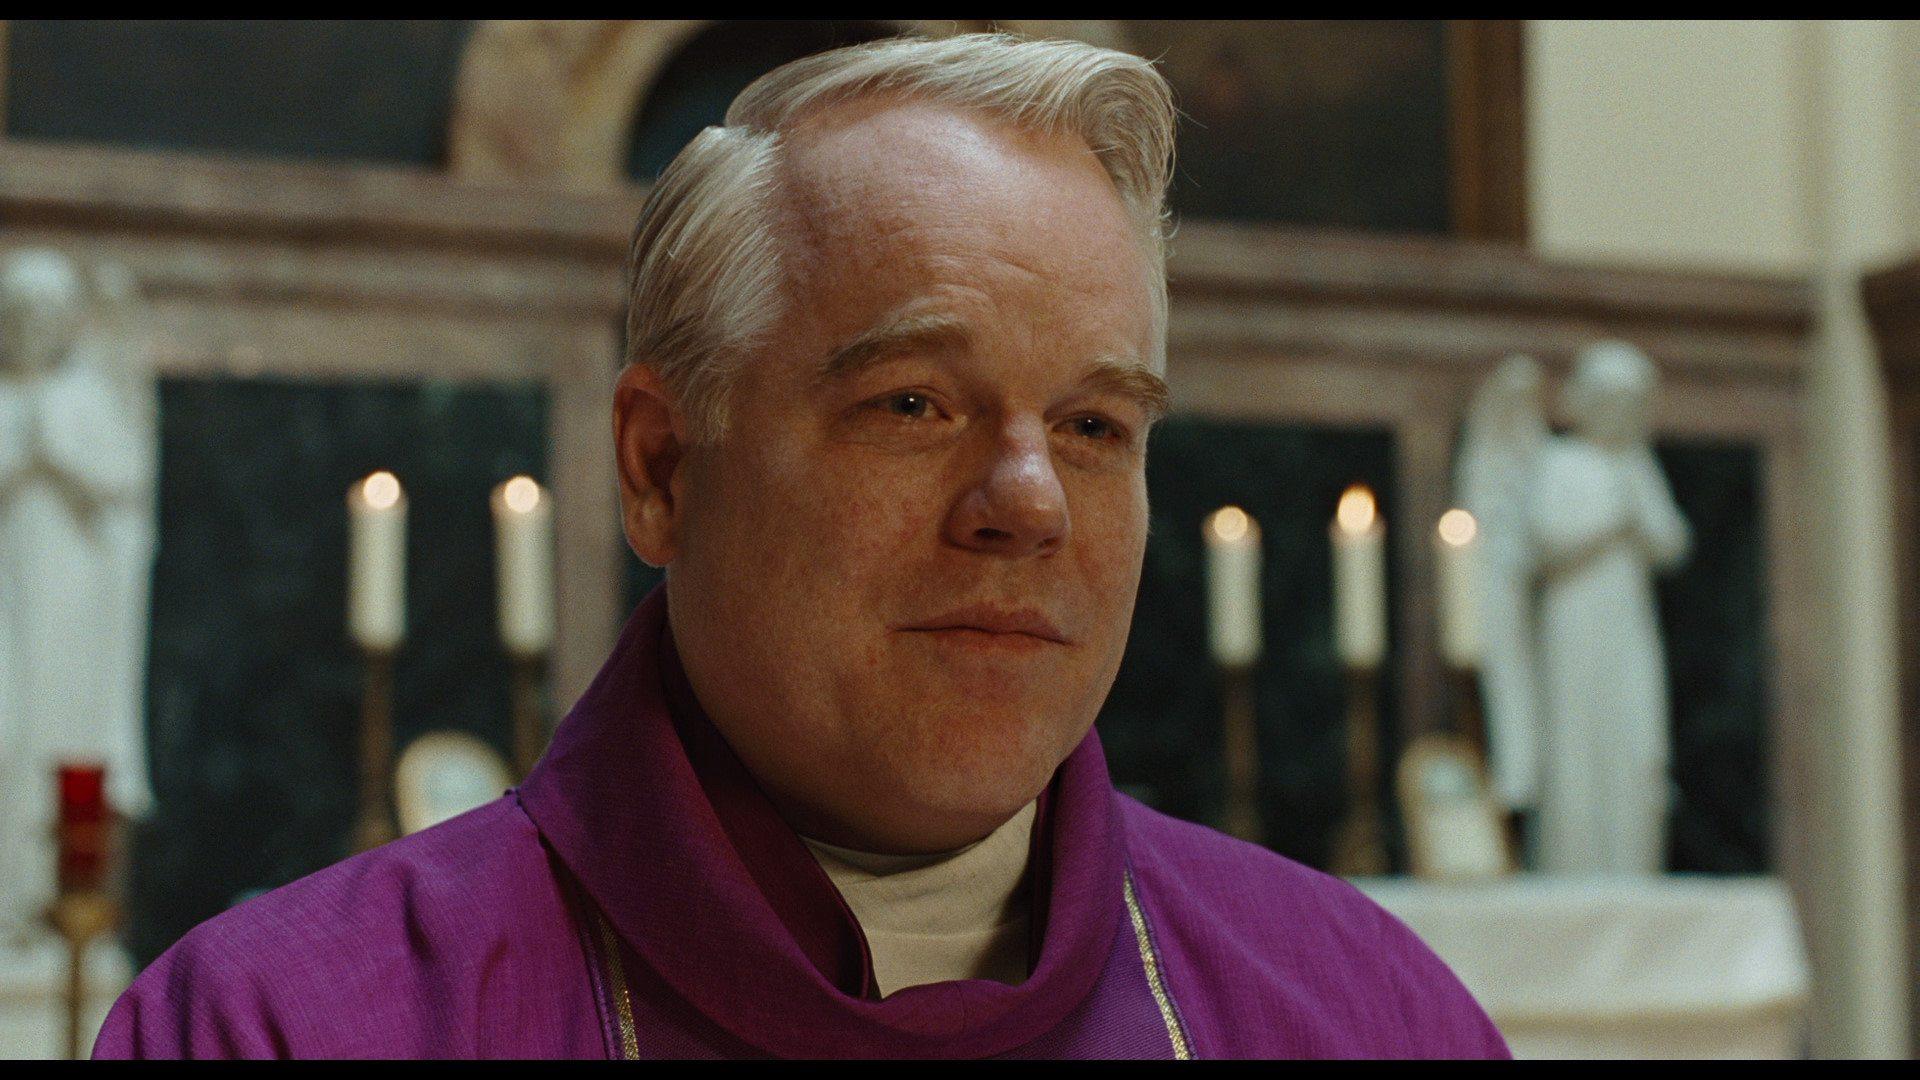 Goodbye Philip Seymour Hoffman. Thank You For These 4 Films